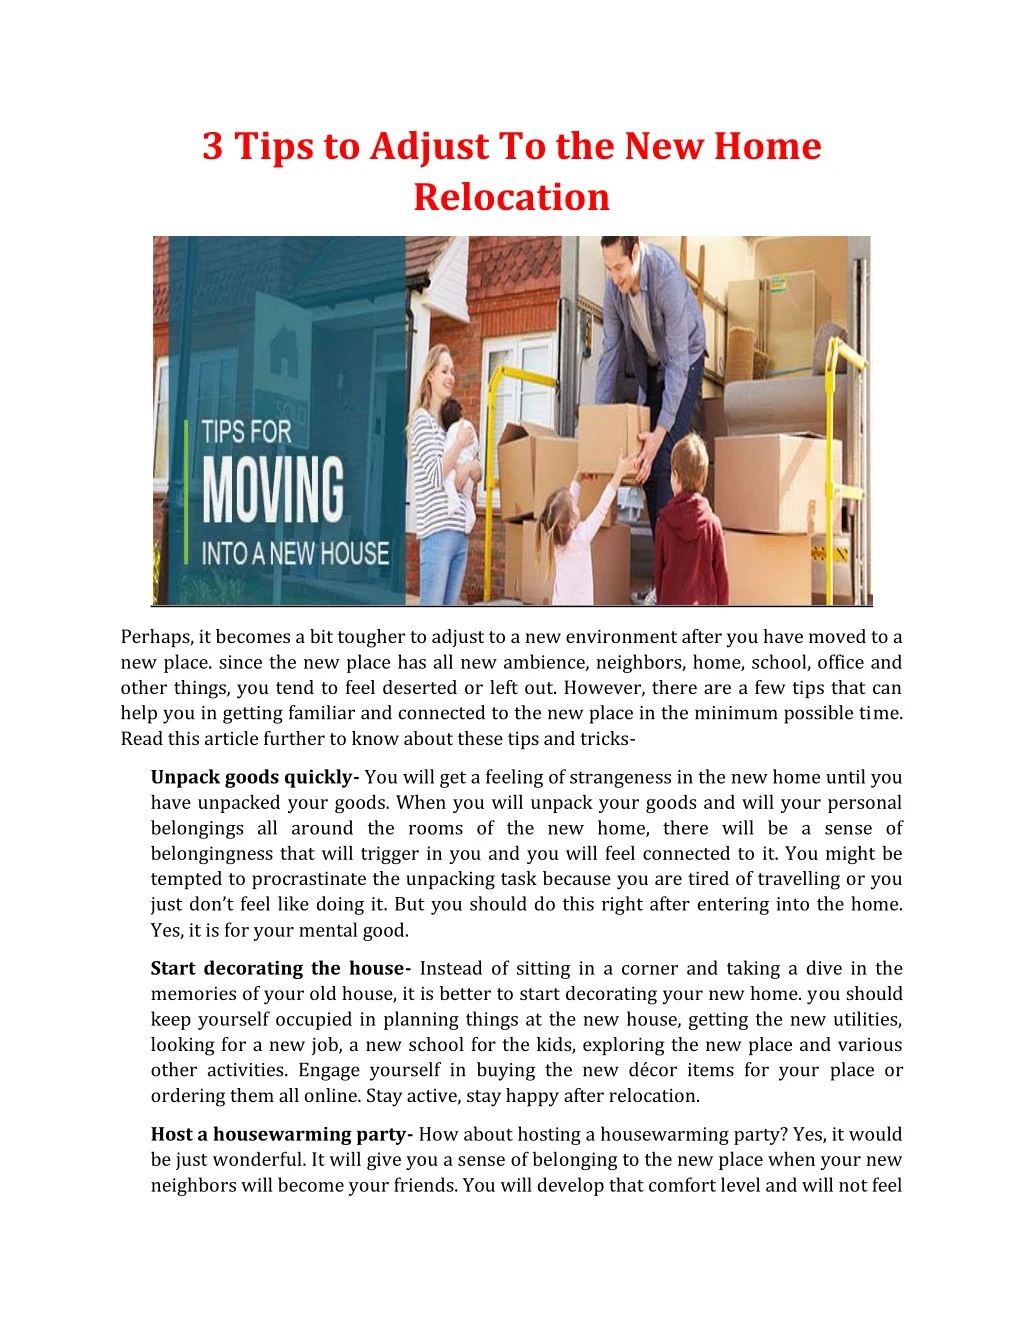 3 tips to adjust to the new home relocation